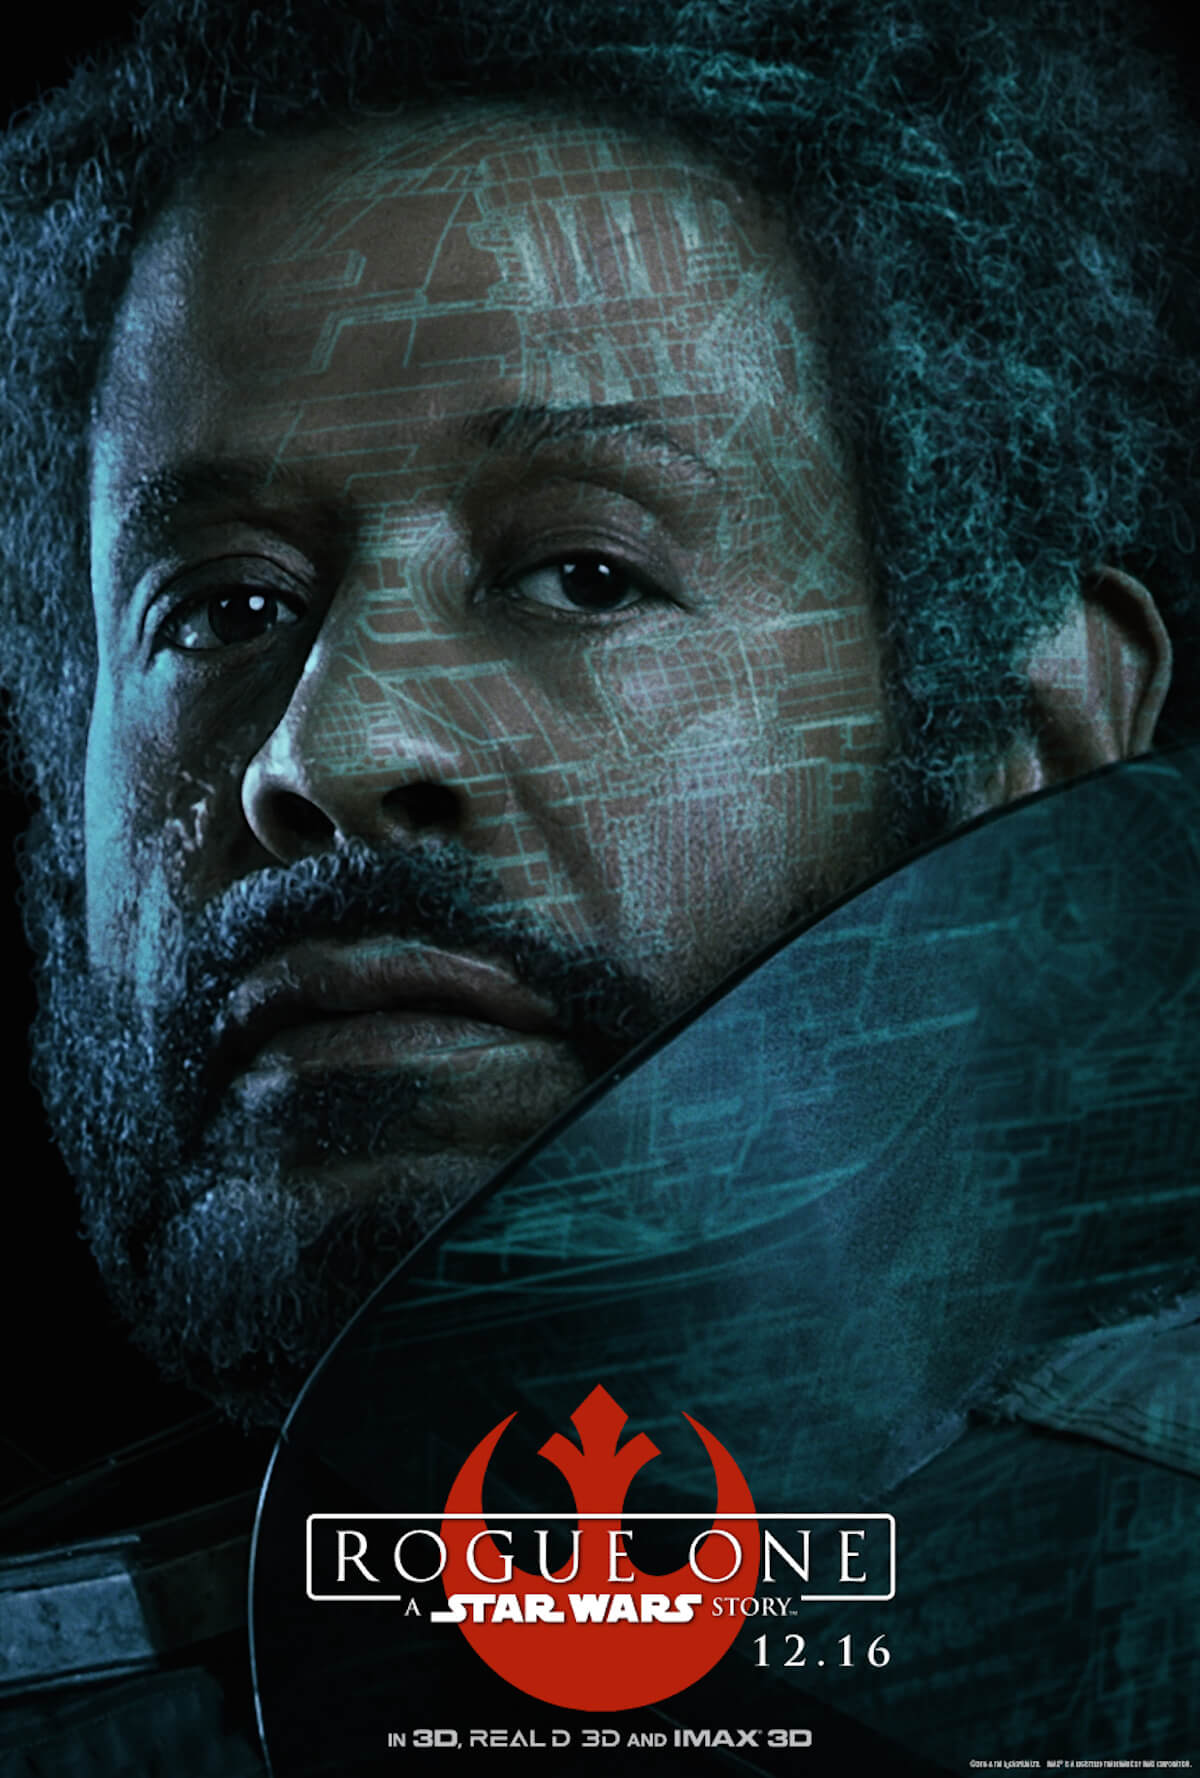 Rogue one poster forest whitaker